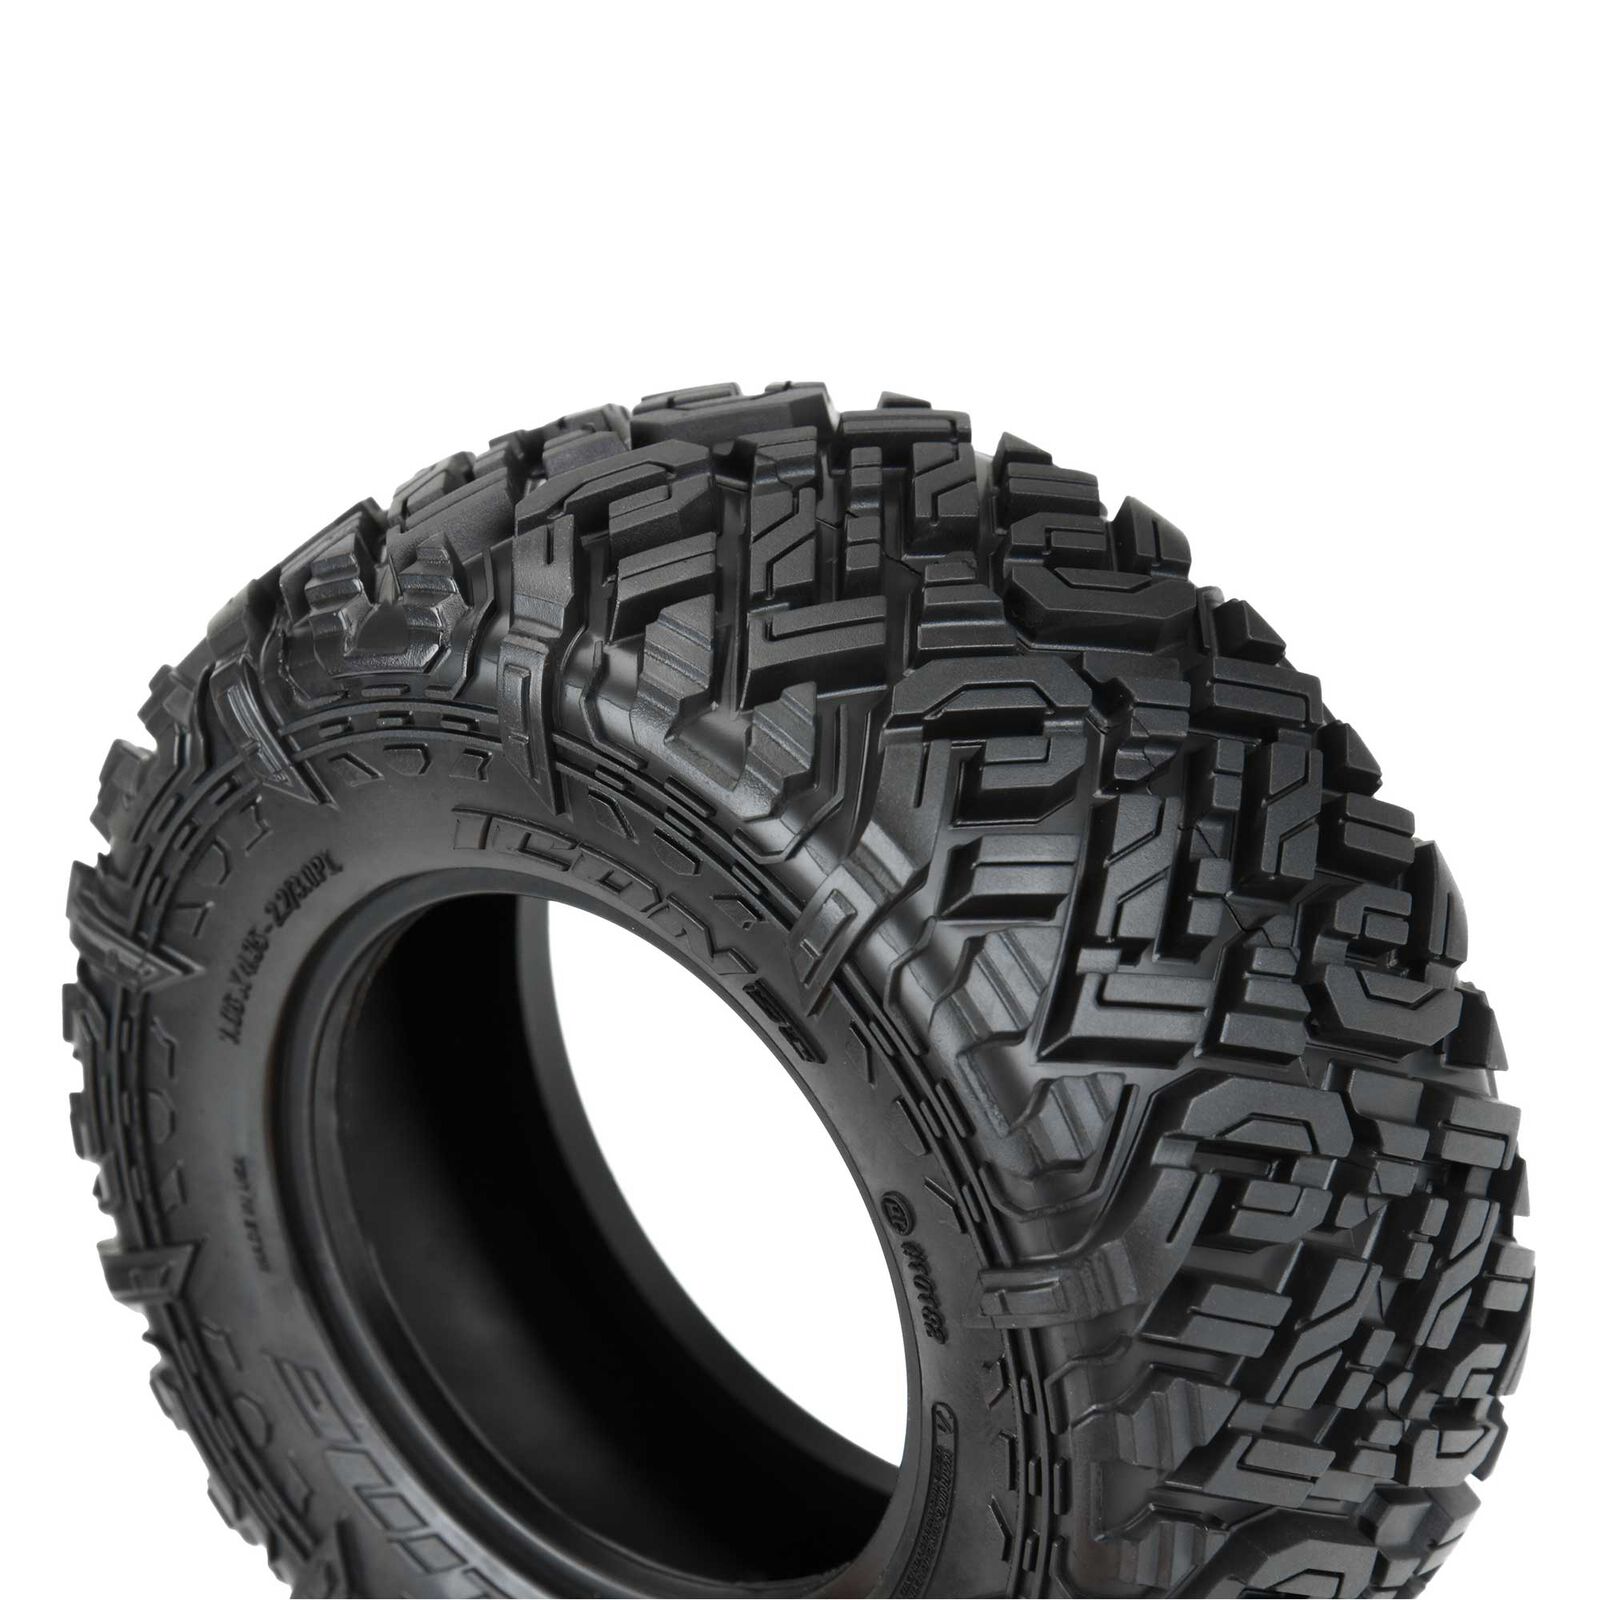 Pro-Line Racing 1/10 Icon Front/Rear Short Tires (2) | Pro-Line